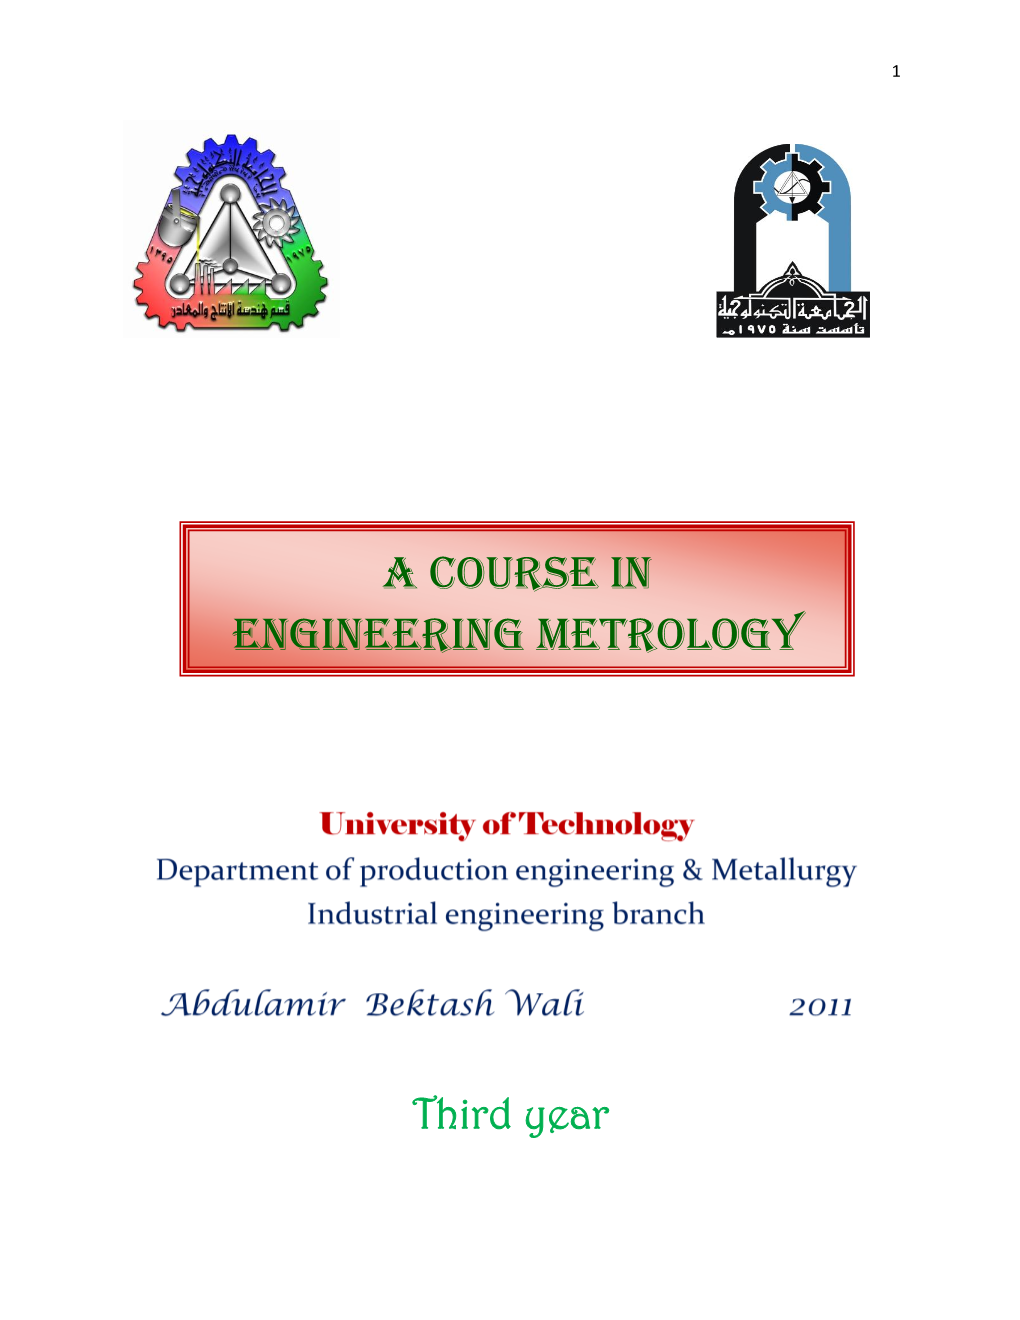 A Course in Engineering Metrology